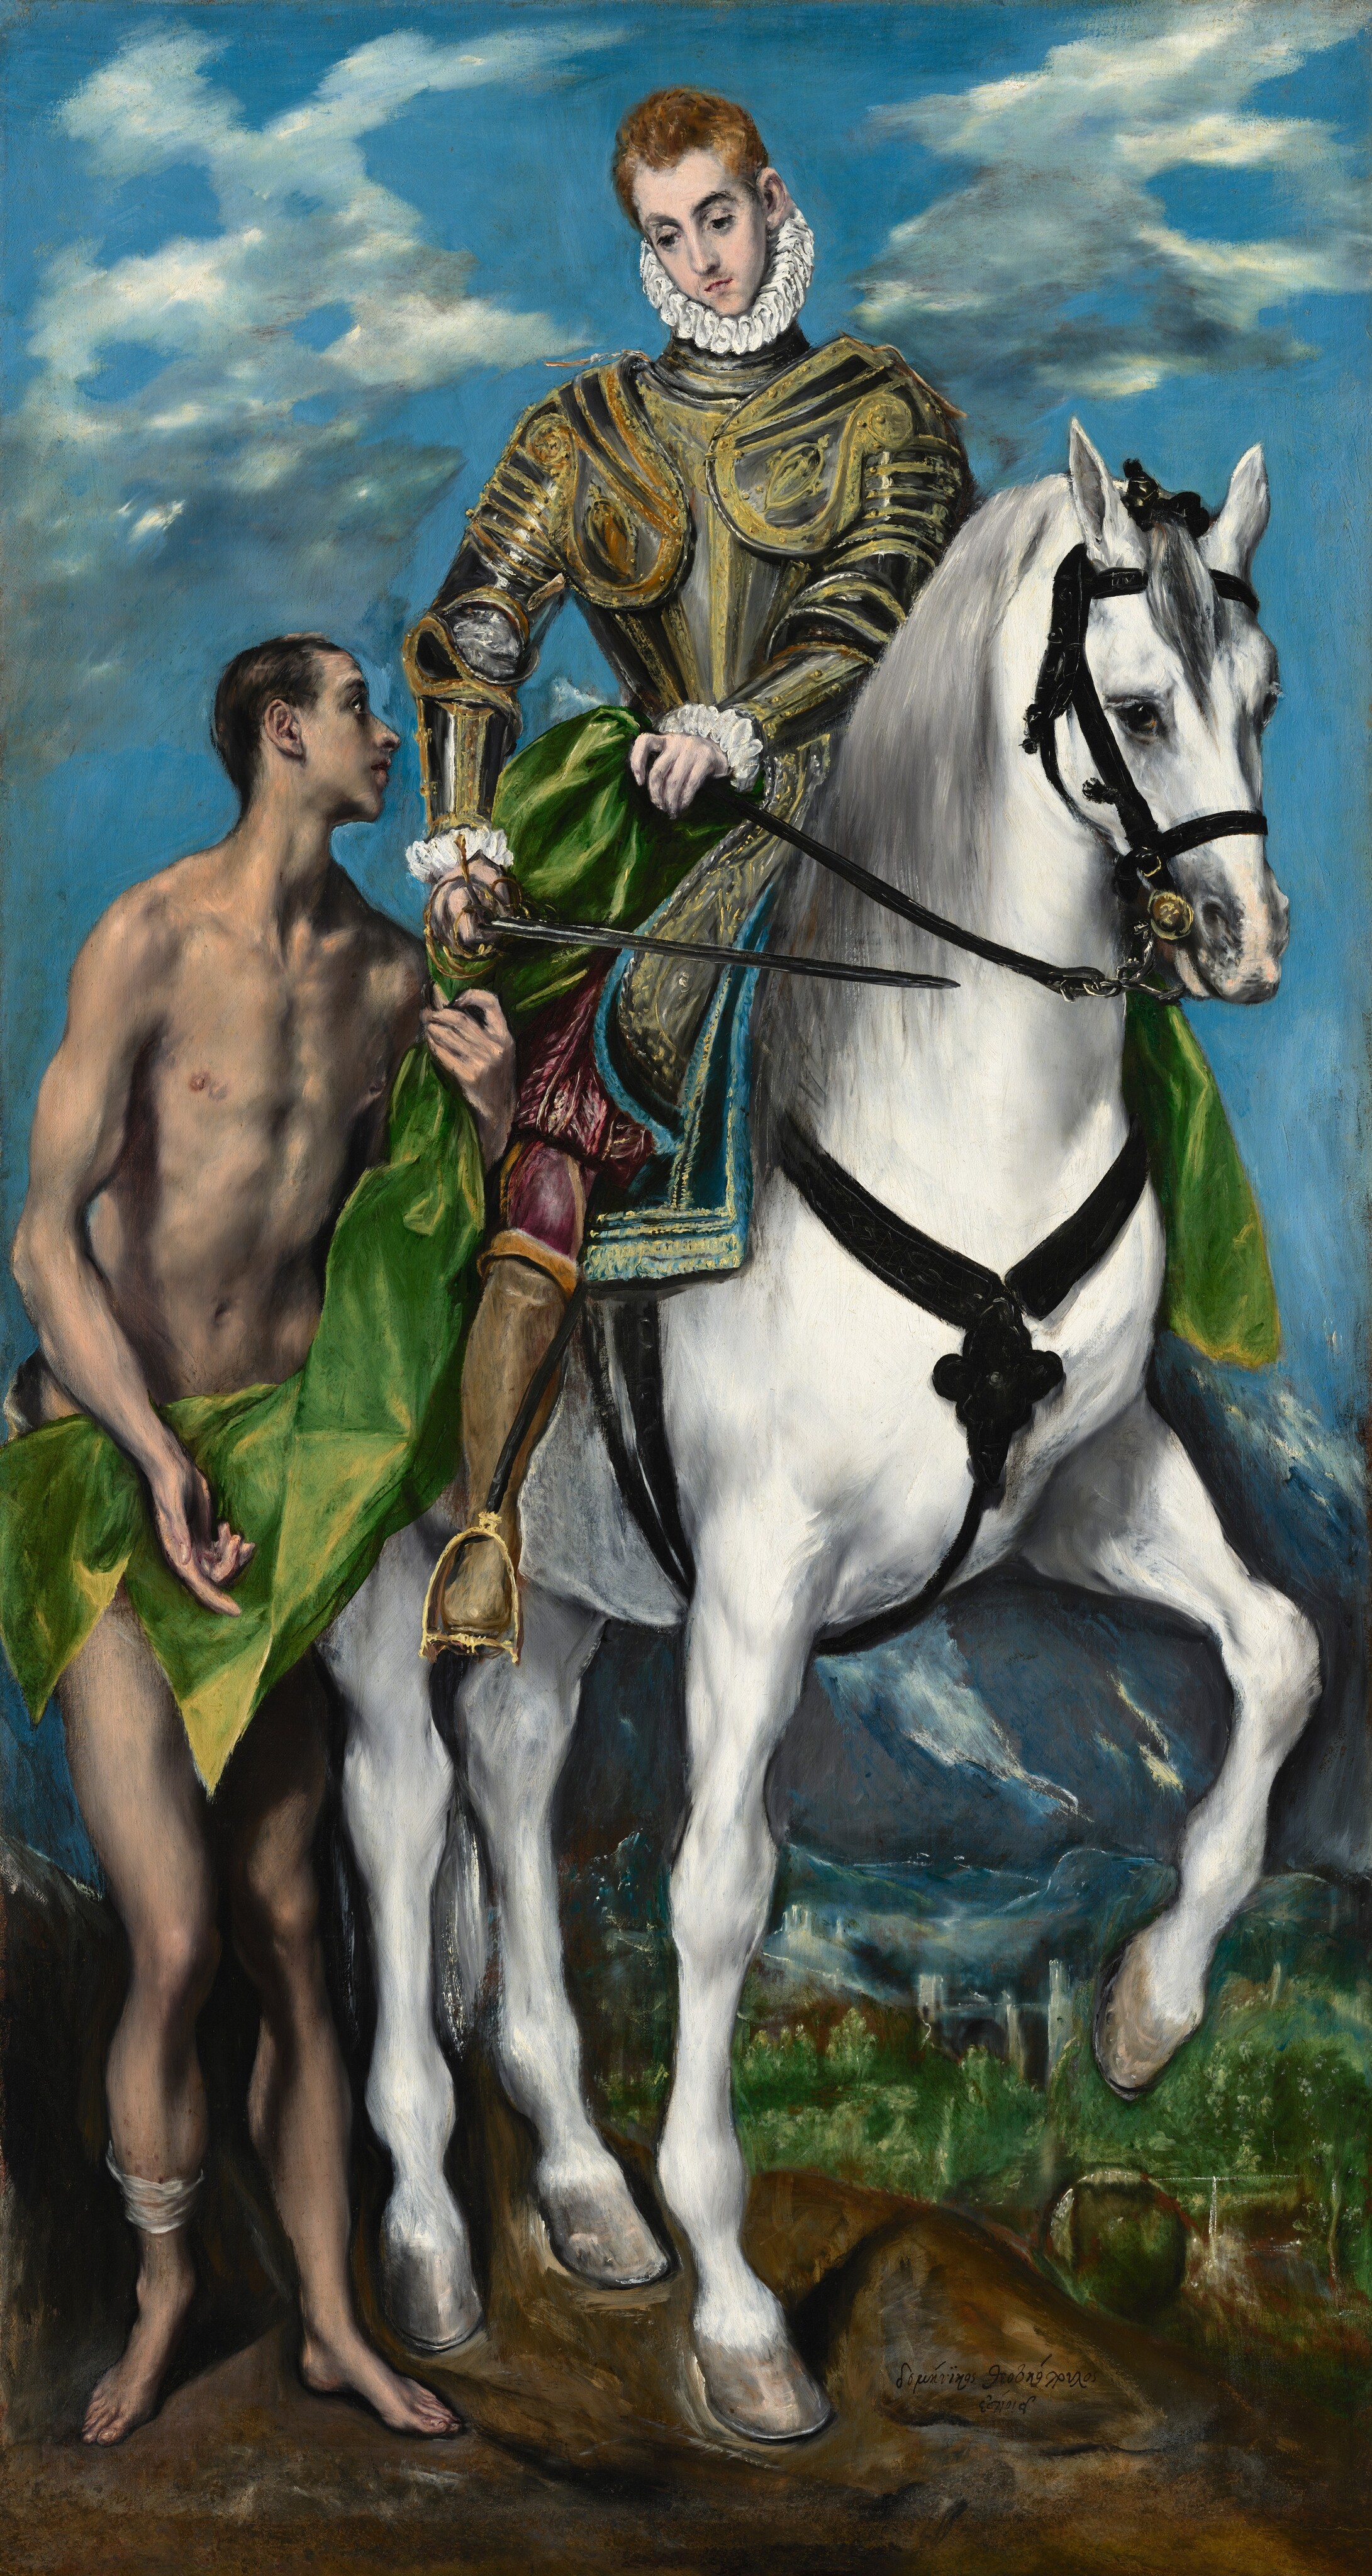 Saint Martin and the Beggar by El Greco - 1597/1599 - 193.5 x 103 cm National Gallery of Art